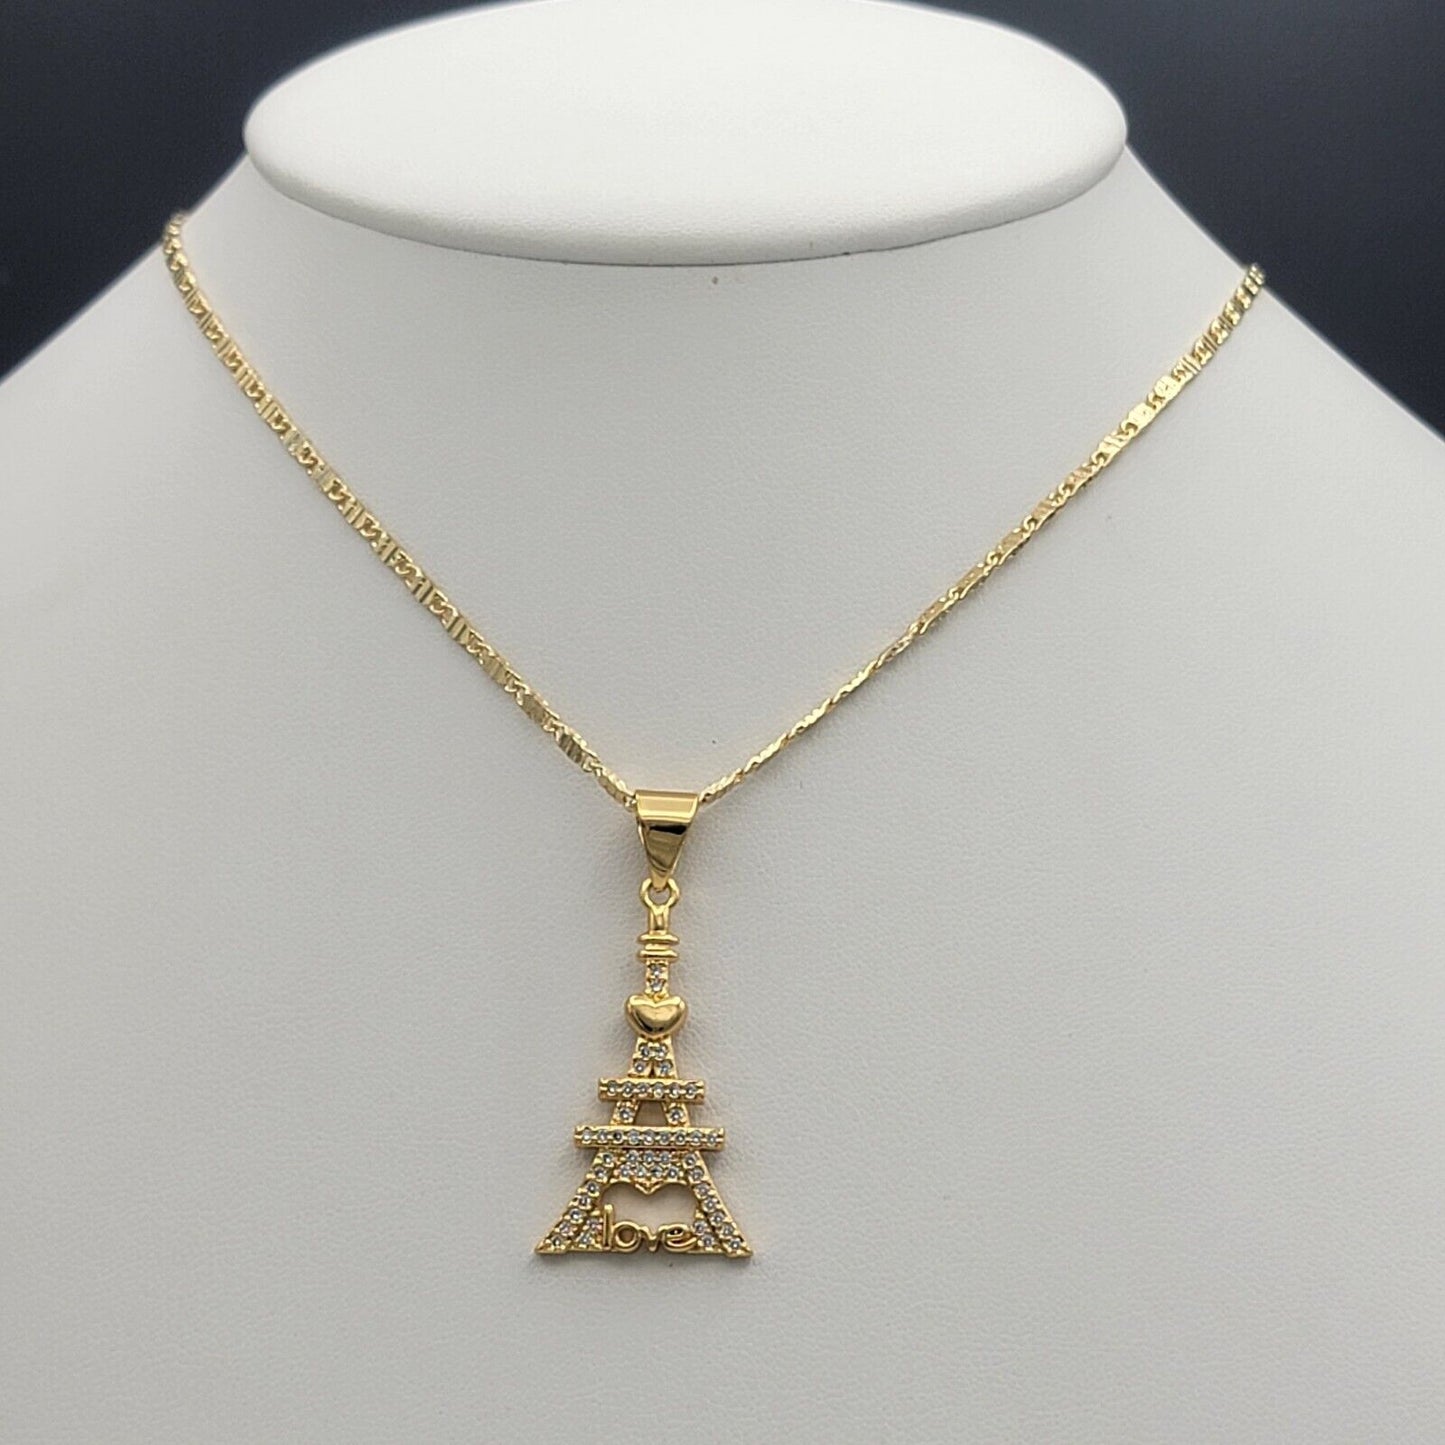 Necklaces - 14K Gold Plated. Eiffel Tower Pendant & Chain